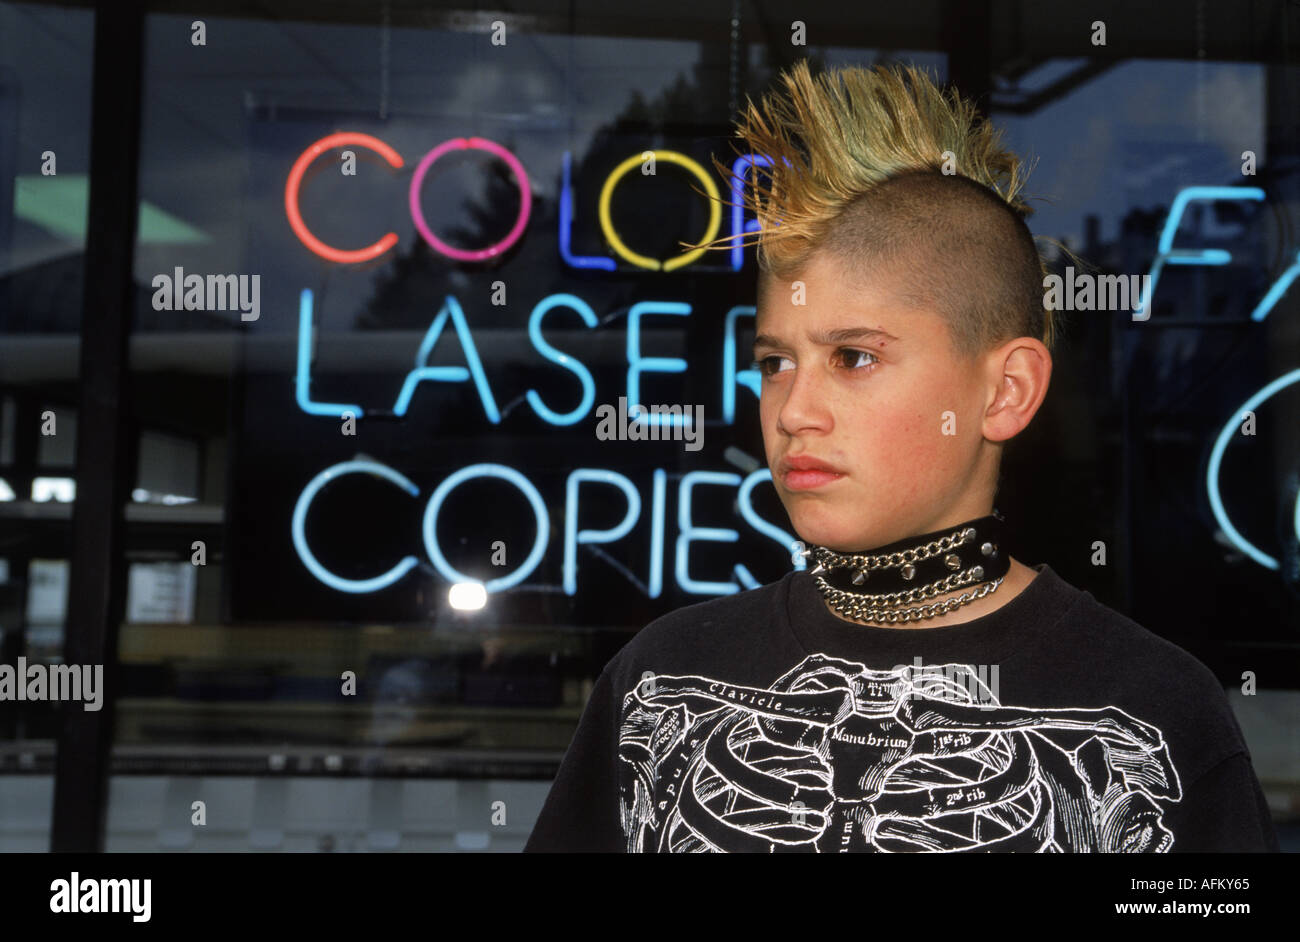 Boy in Los Angeles with mohawk hair cut or spiked hairstyle Stock Photo